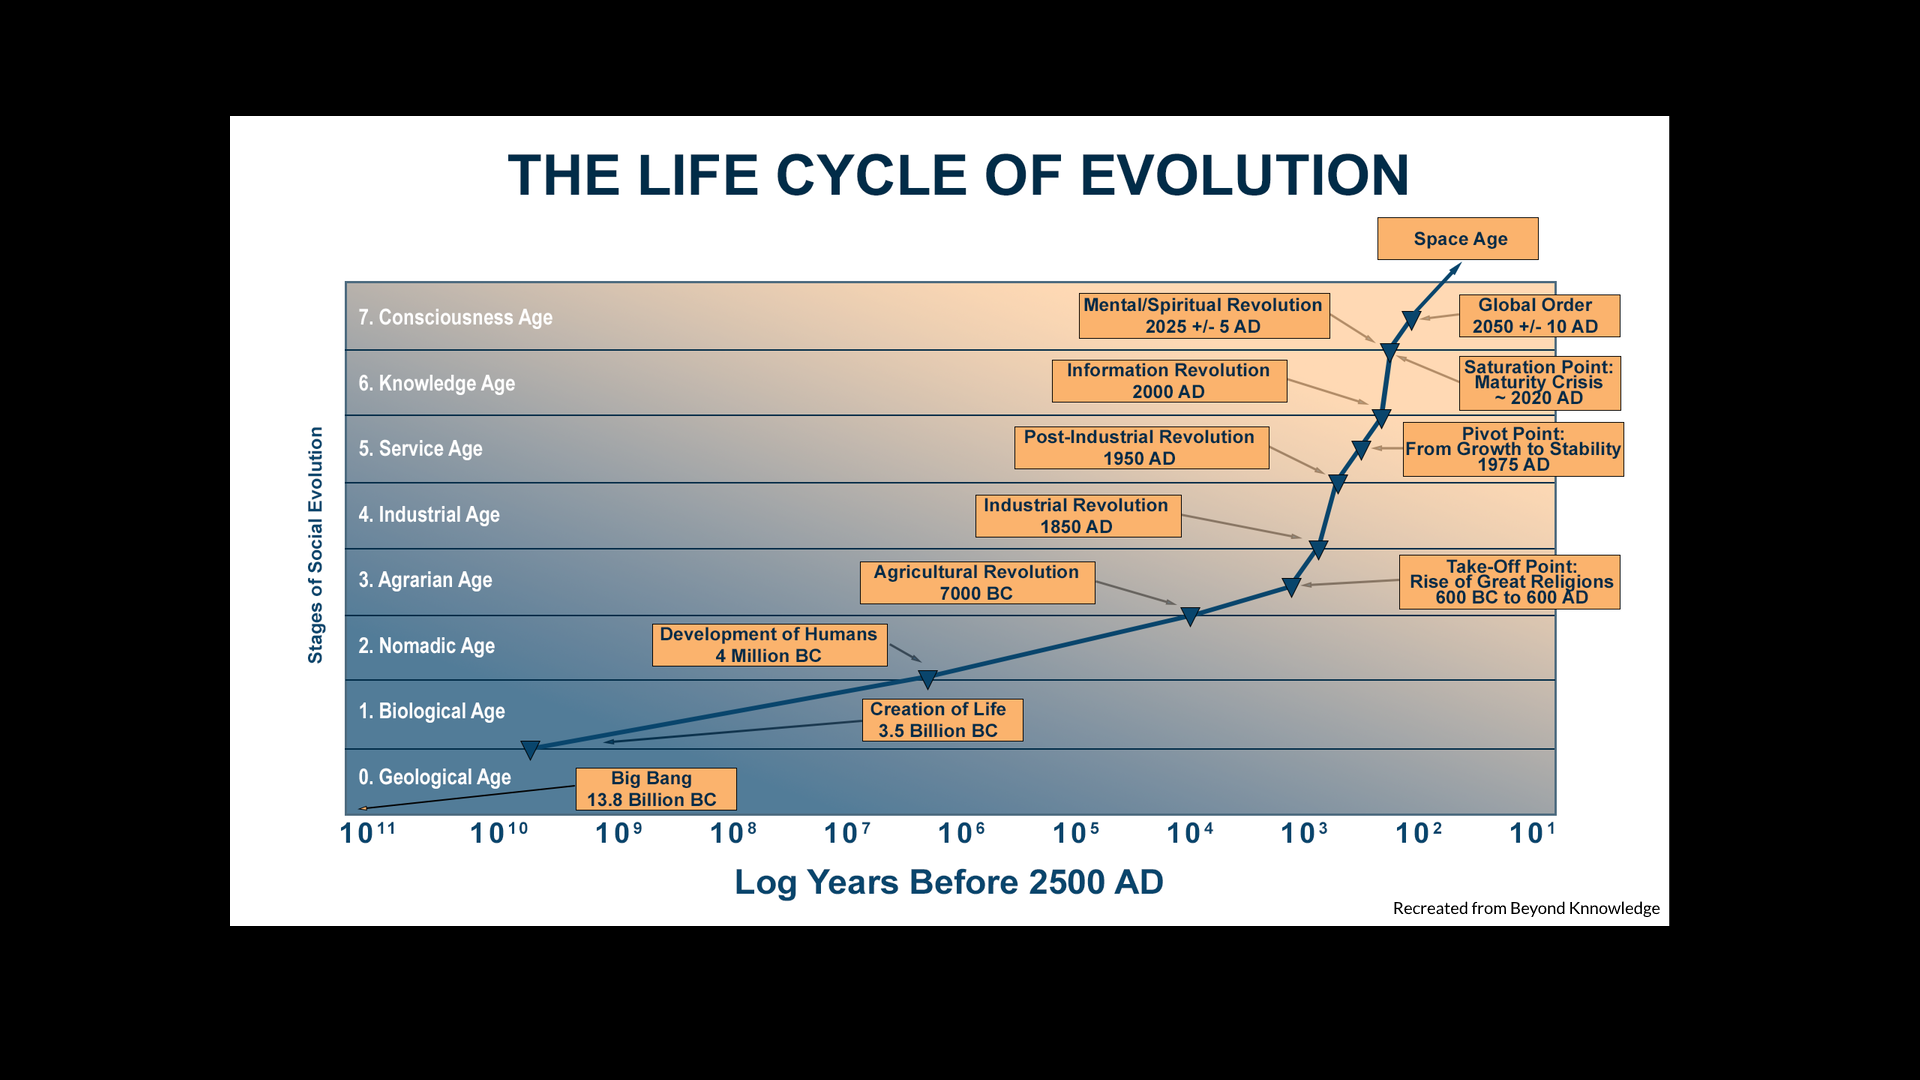 The lifecycle of evolution graph